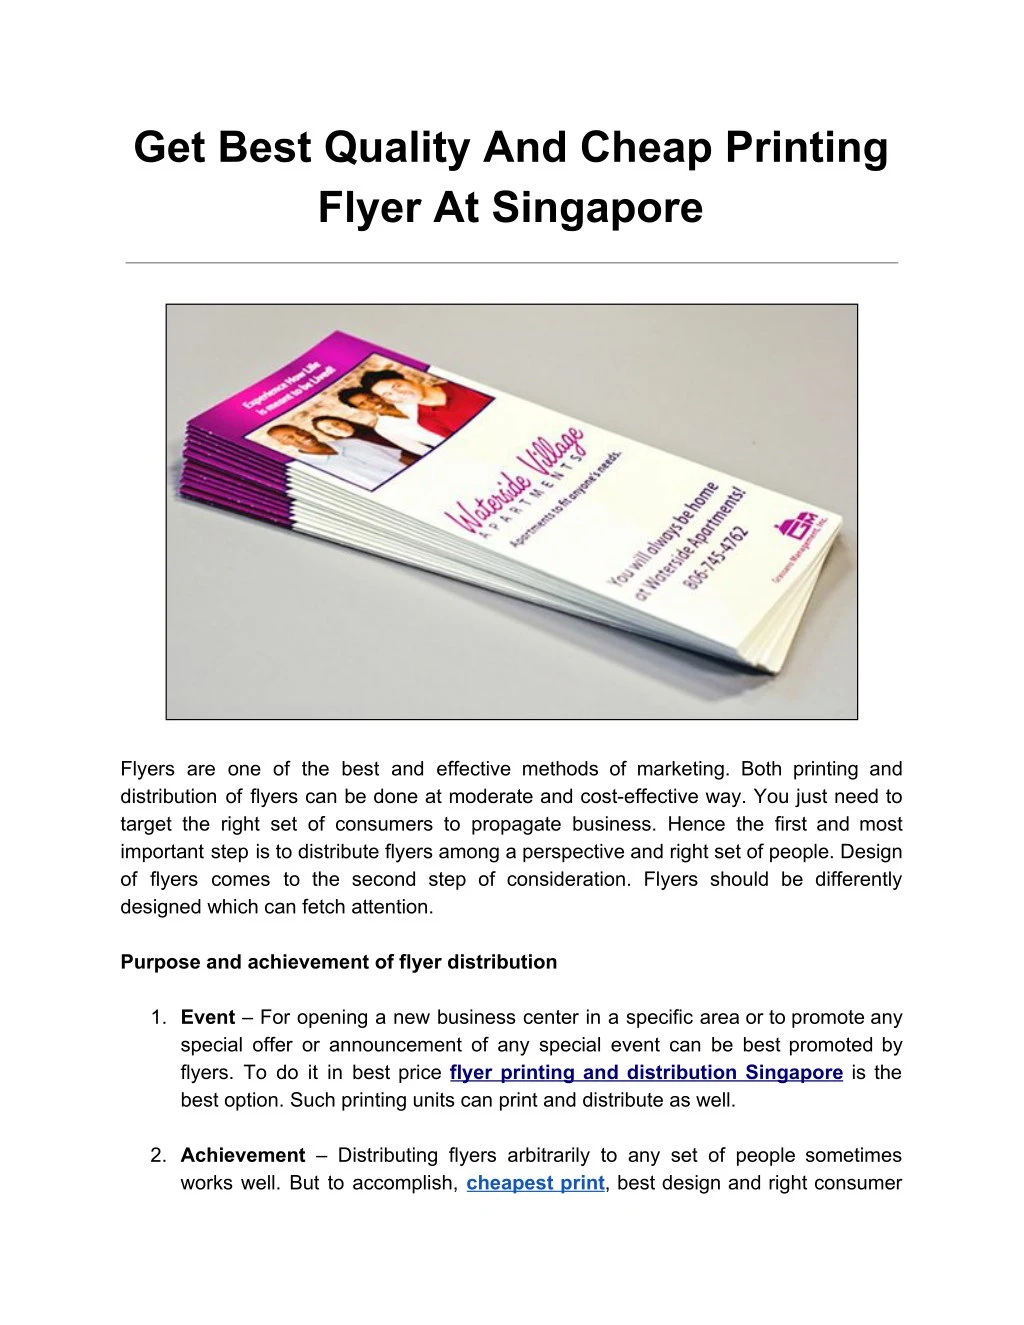 get best quality and cheap printing flyer